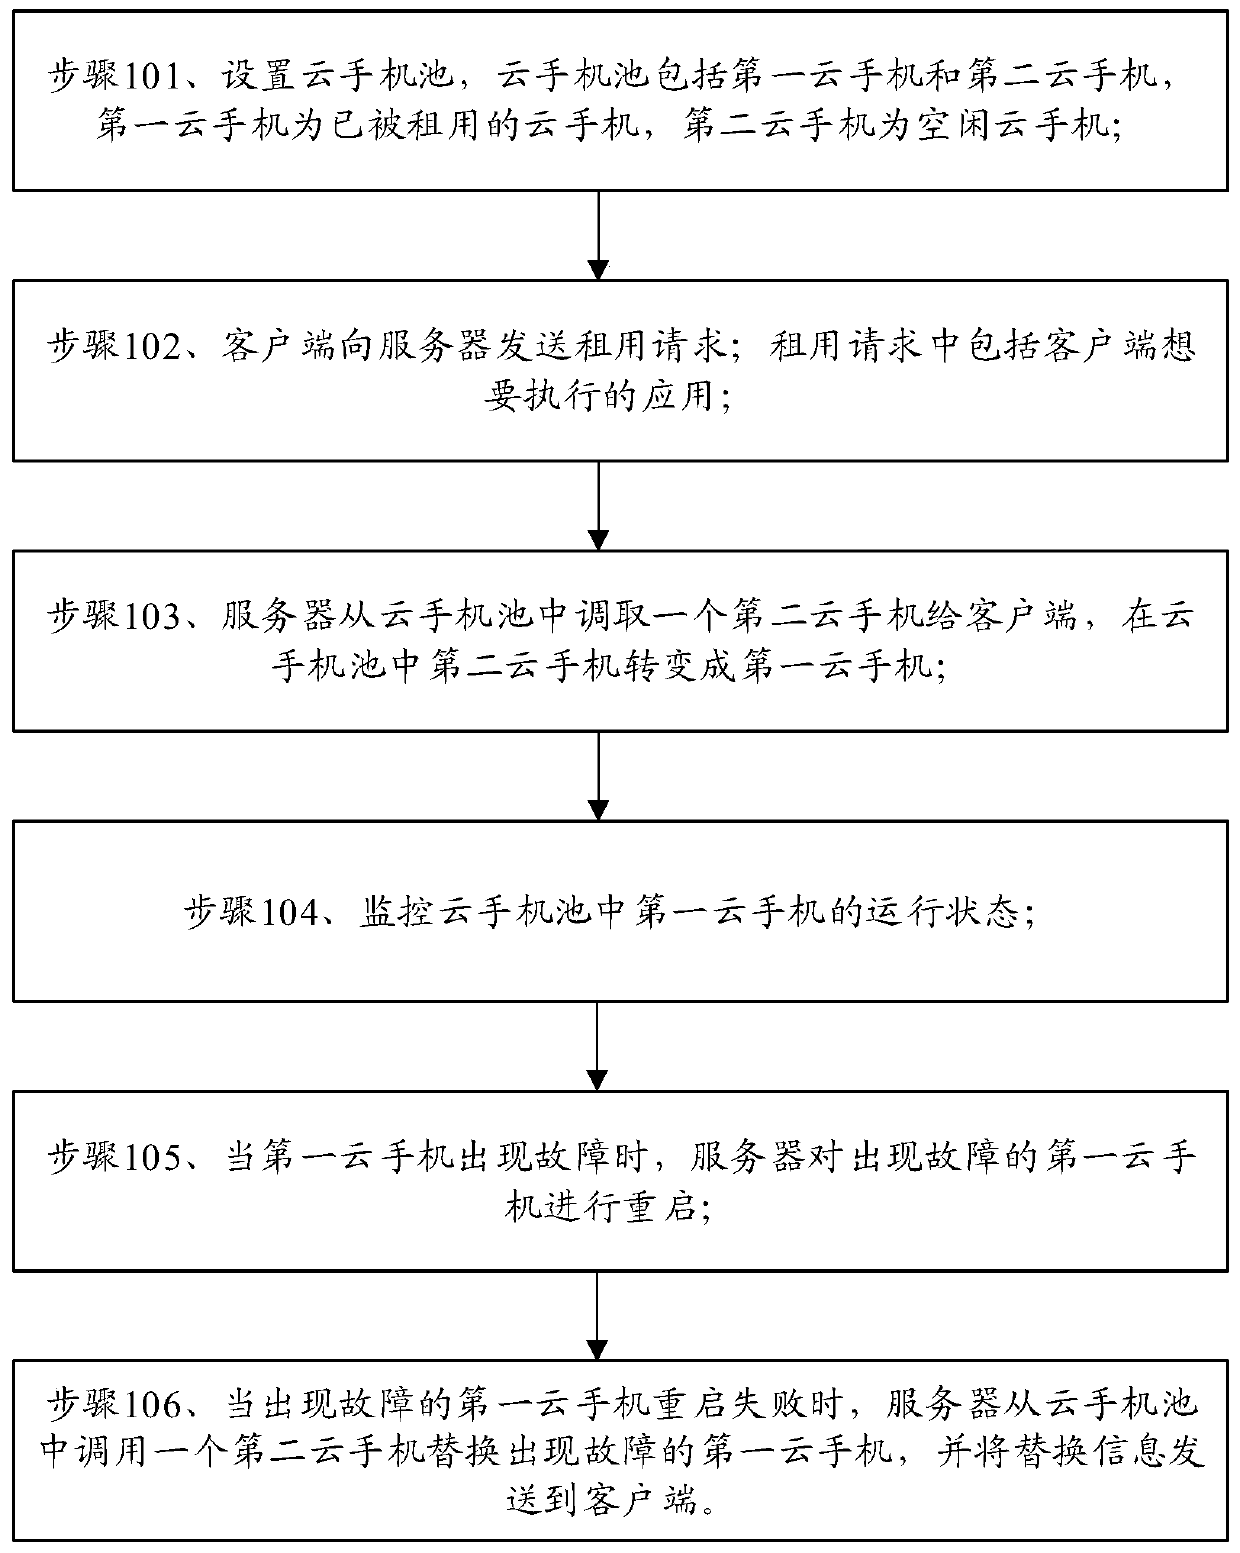 Cloud mobile phone monitoring system and method